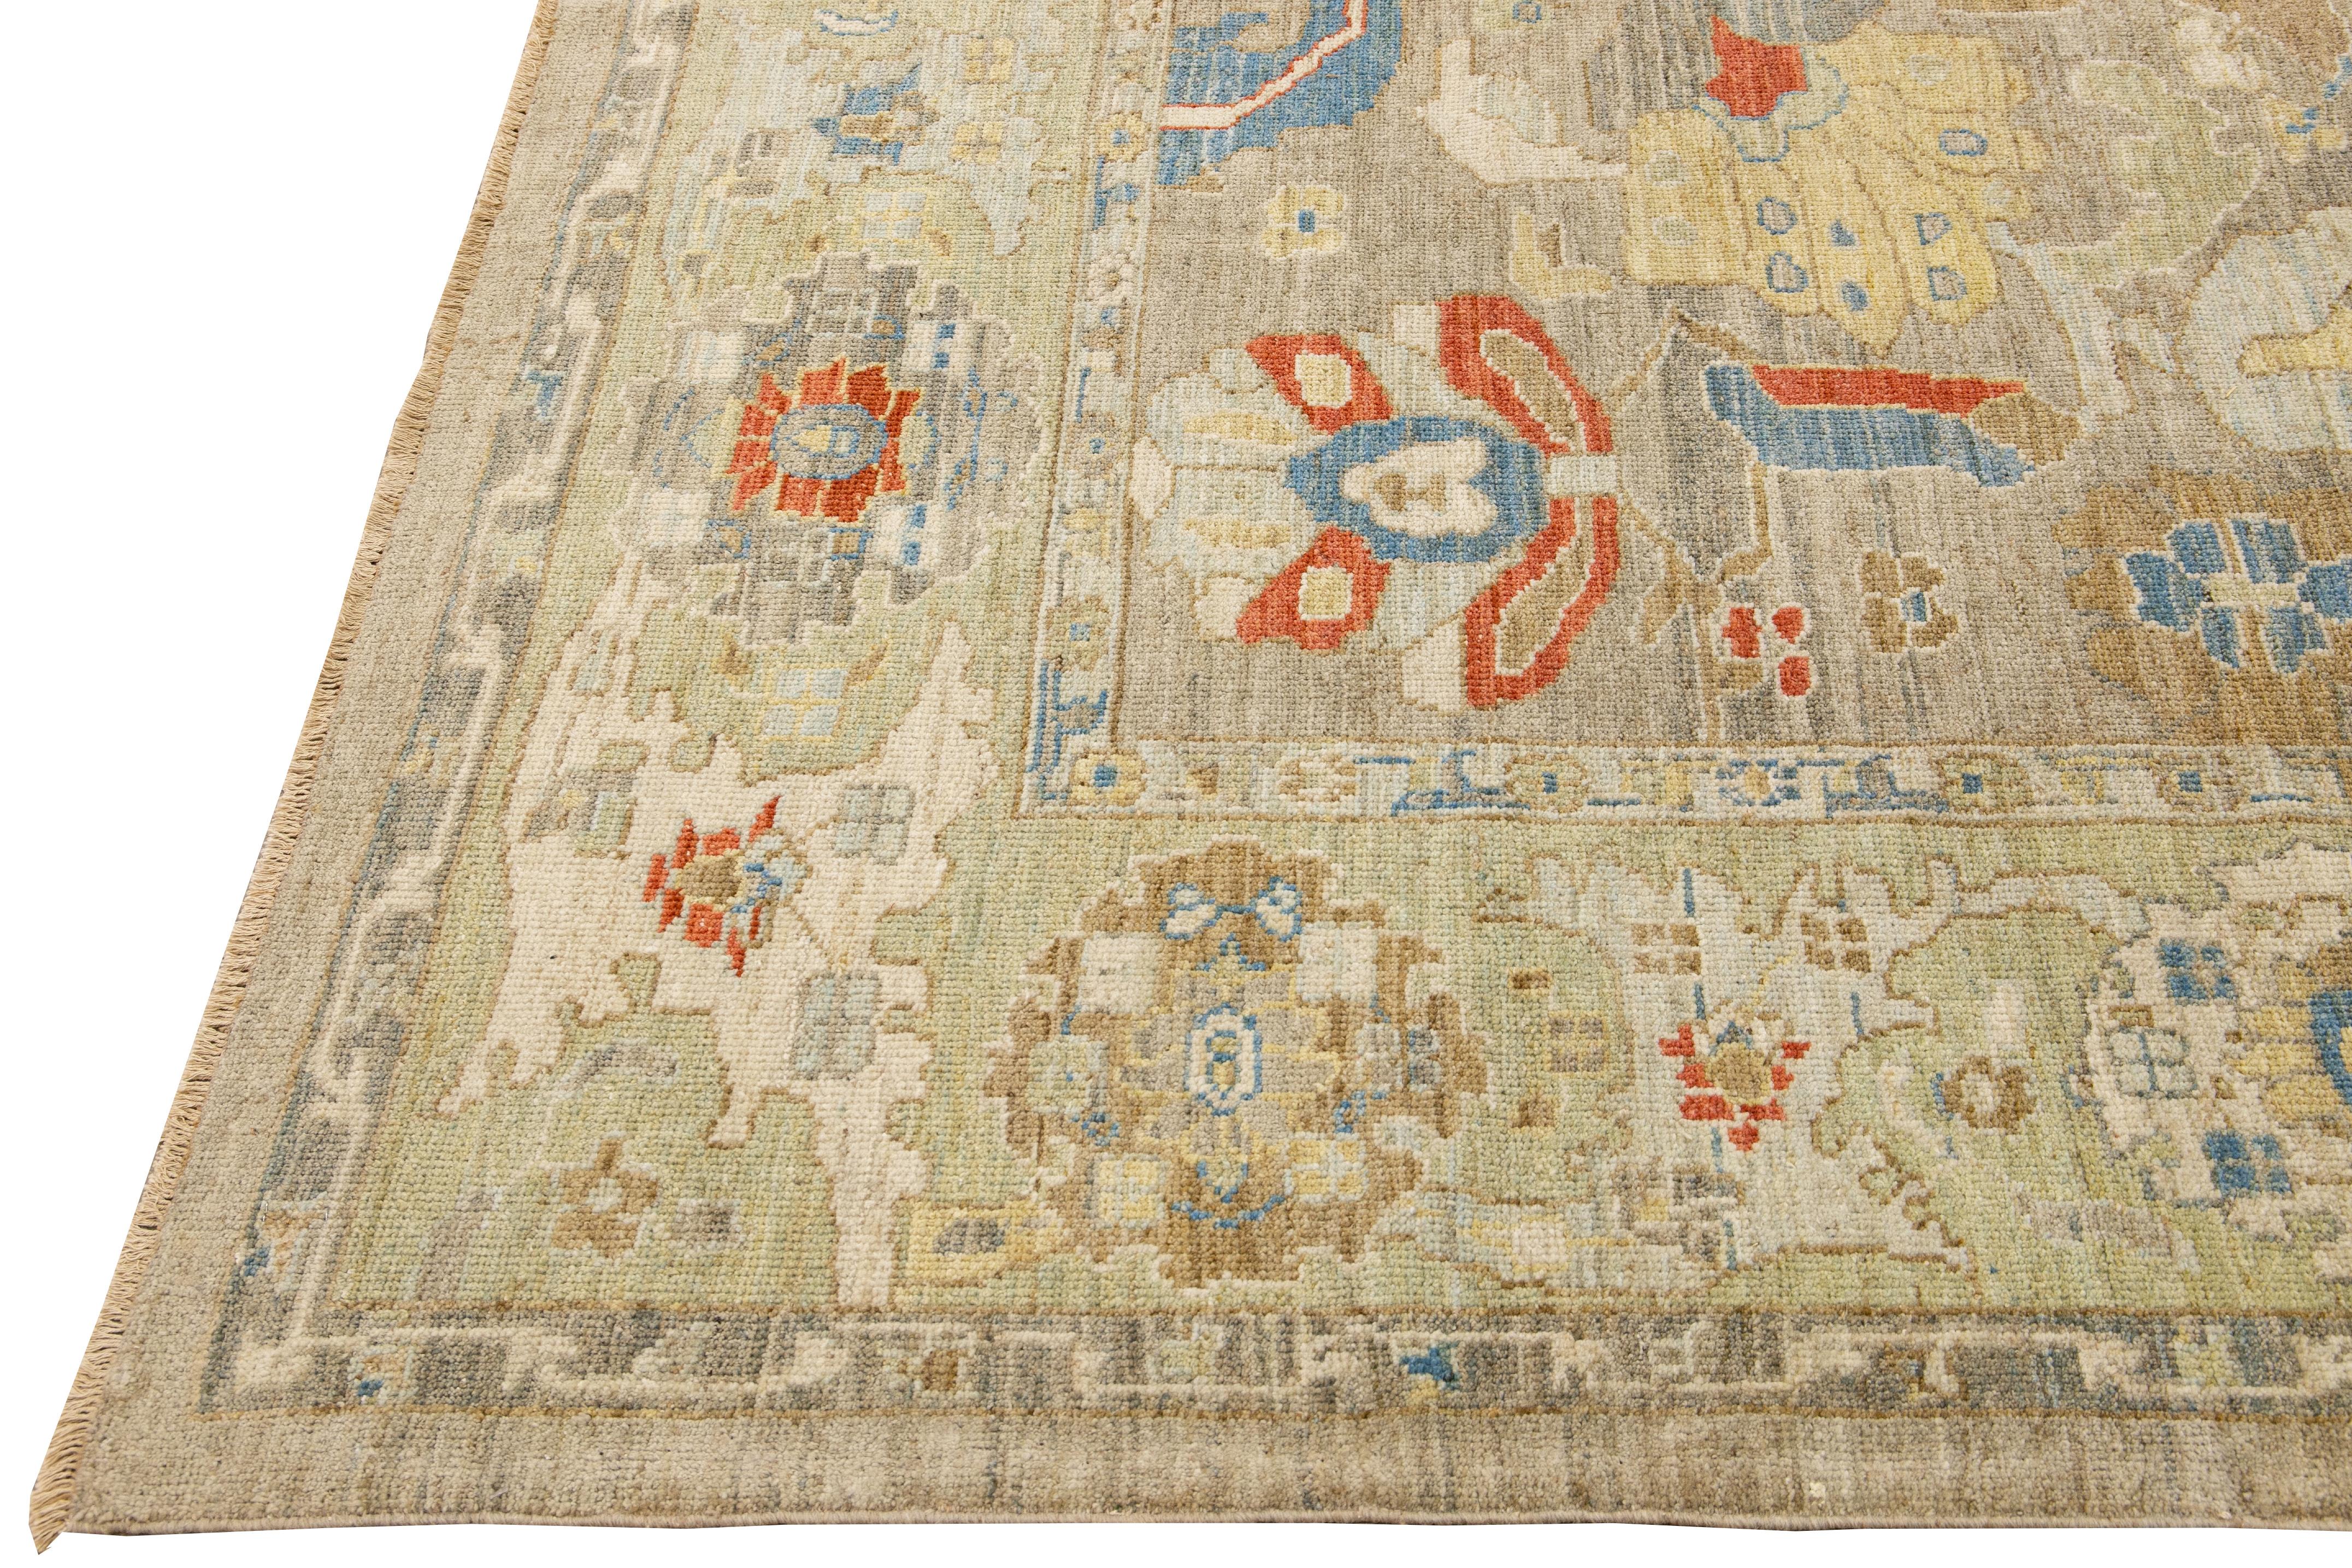 This stunning, hand-knotted Sultanabad rug features a modern design with a light brown base. The Persian rug is bordered with a green frame and embellished with many colors that form an attractive floral pattern.

This rug measures 10'4